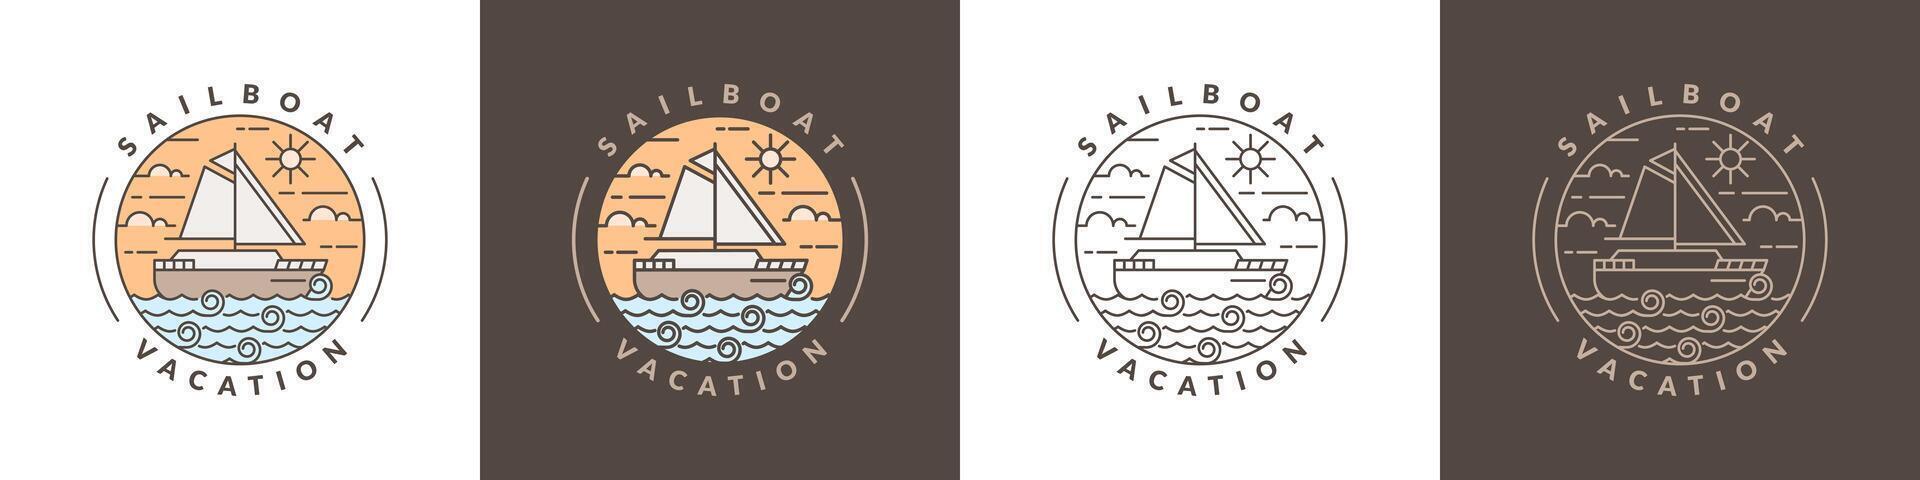 illustration of sailboat and ocean monoline or line art style vector